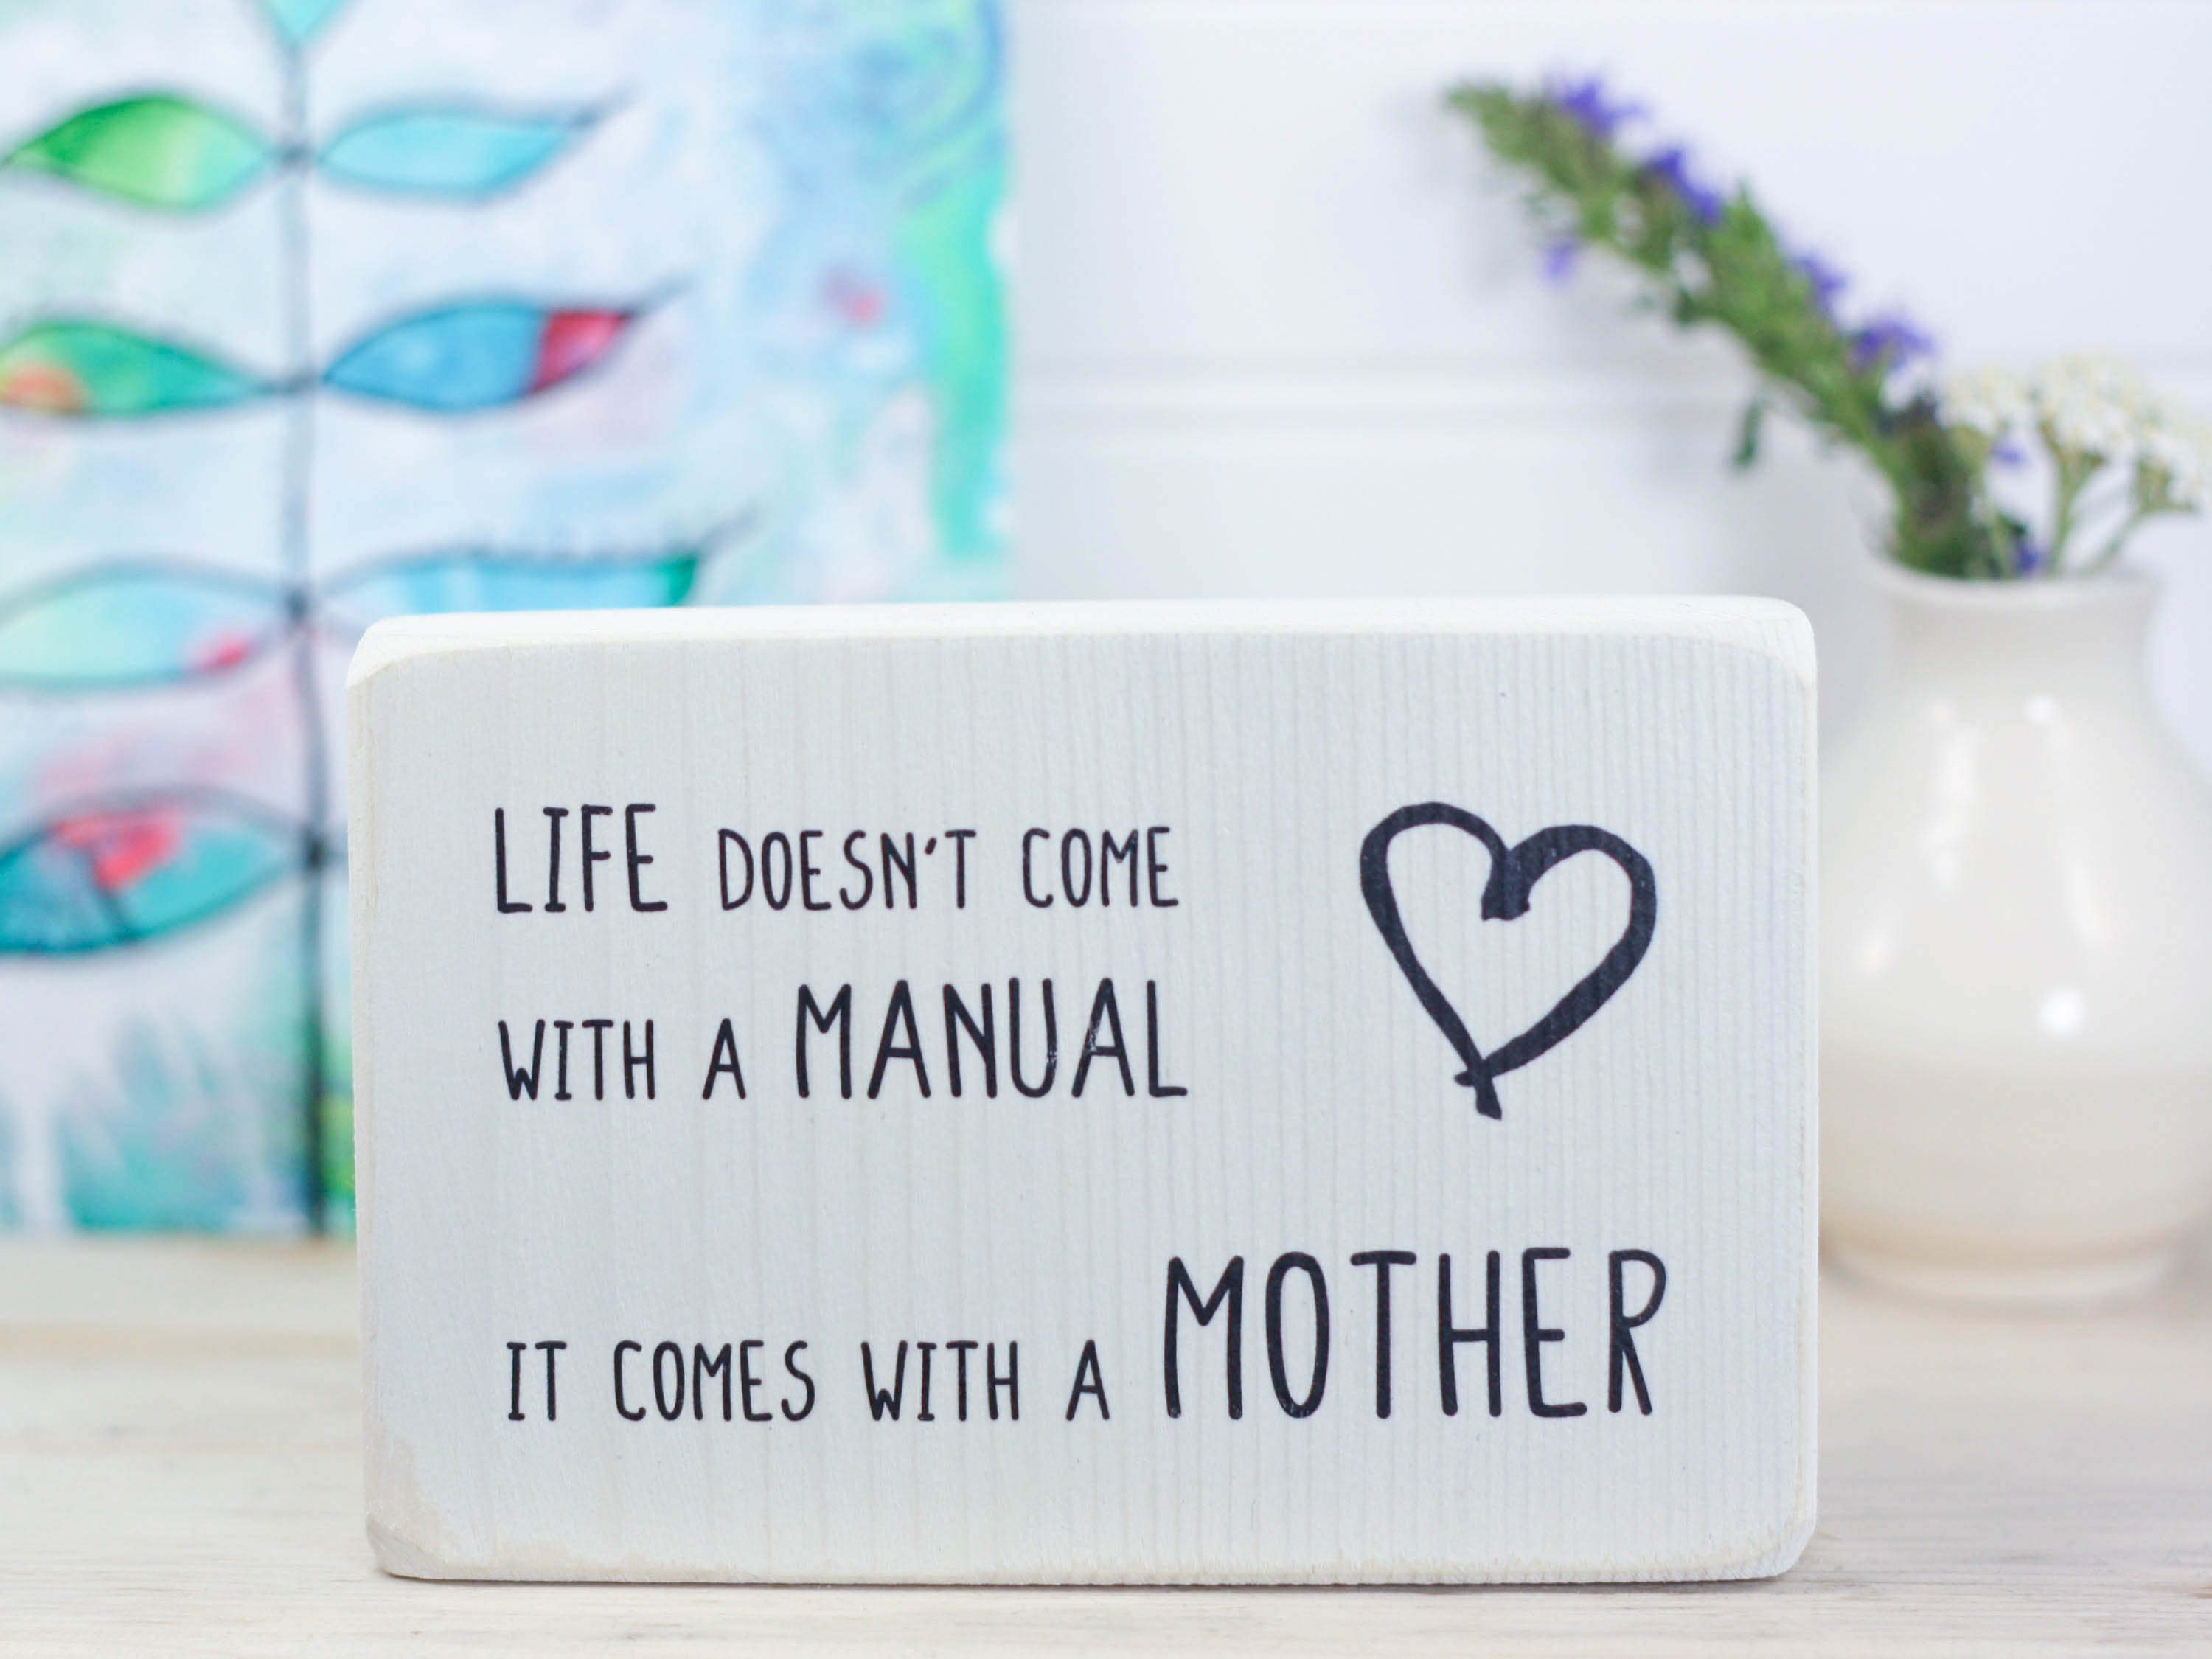 Small wood decor sign in whitewash with the saying "Life doesn't come with a manual. It comes with a mother."